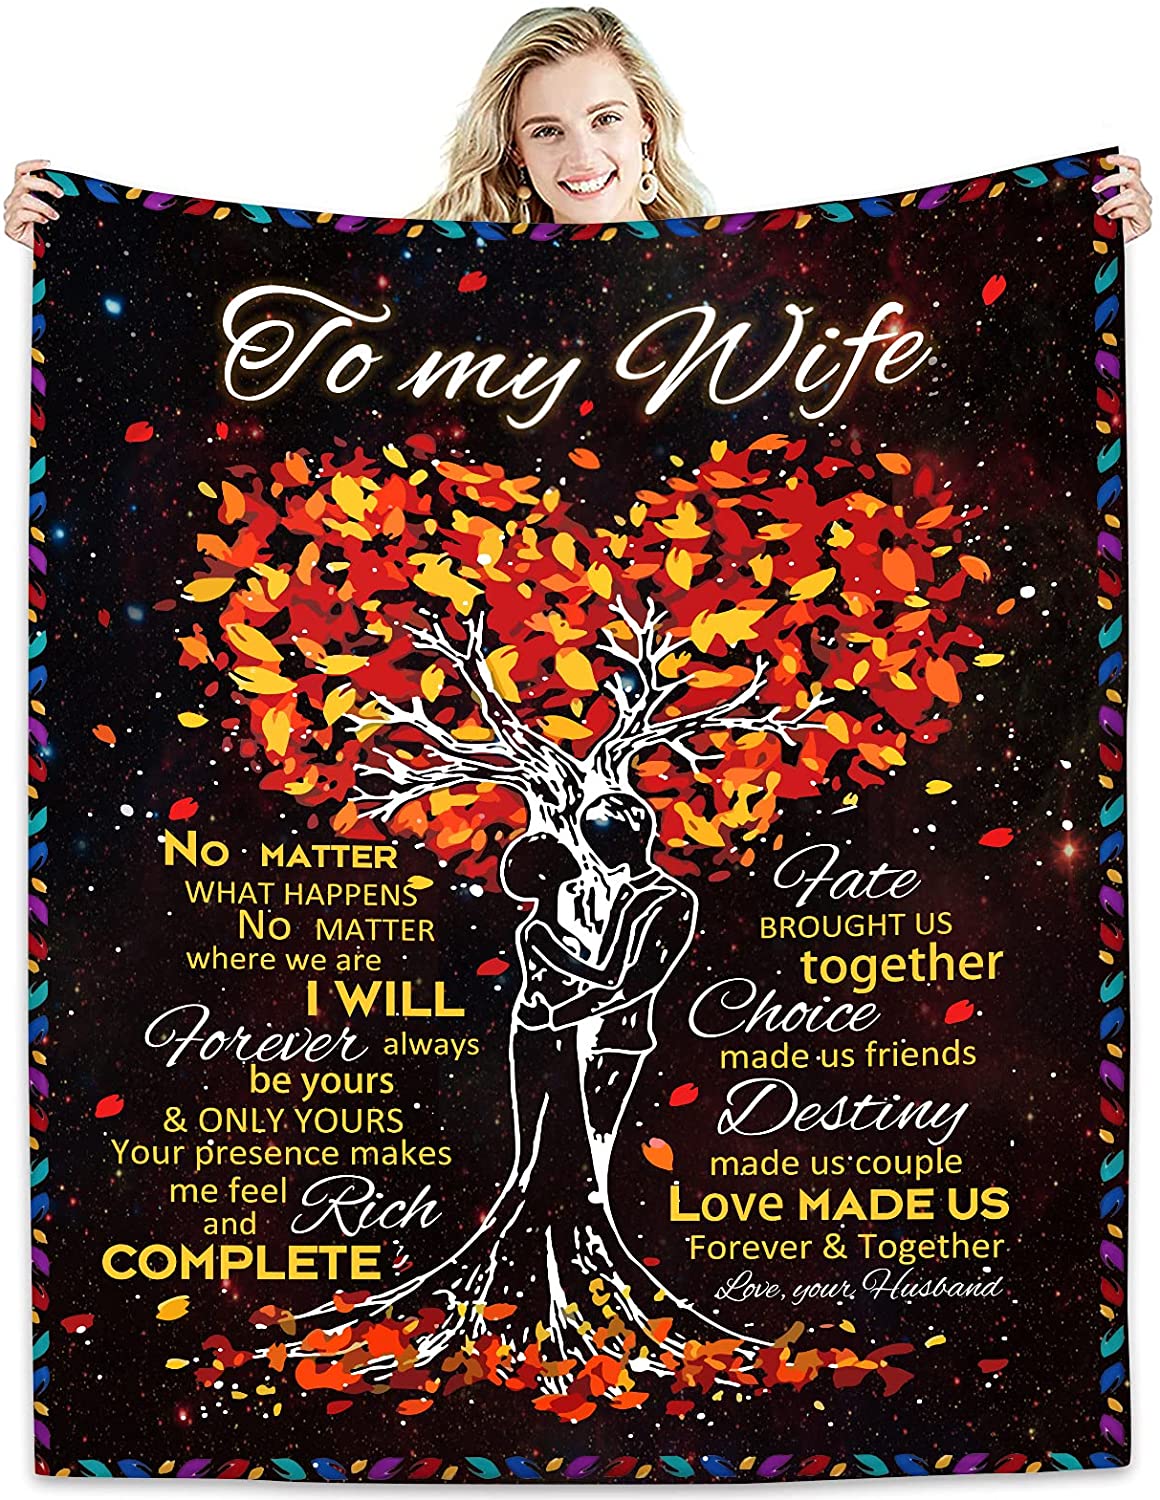 Gift For Wife, Couple Blanket, Couple under the tree, Autumn leaves, fate brought us together Blanket - Valentine, Christmas, Wedding Anniversary Fleece Blanket